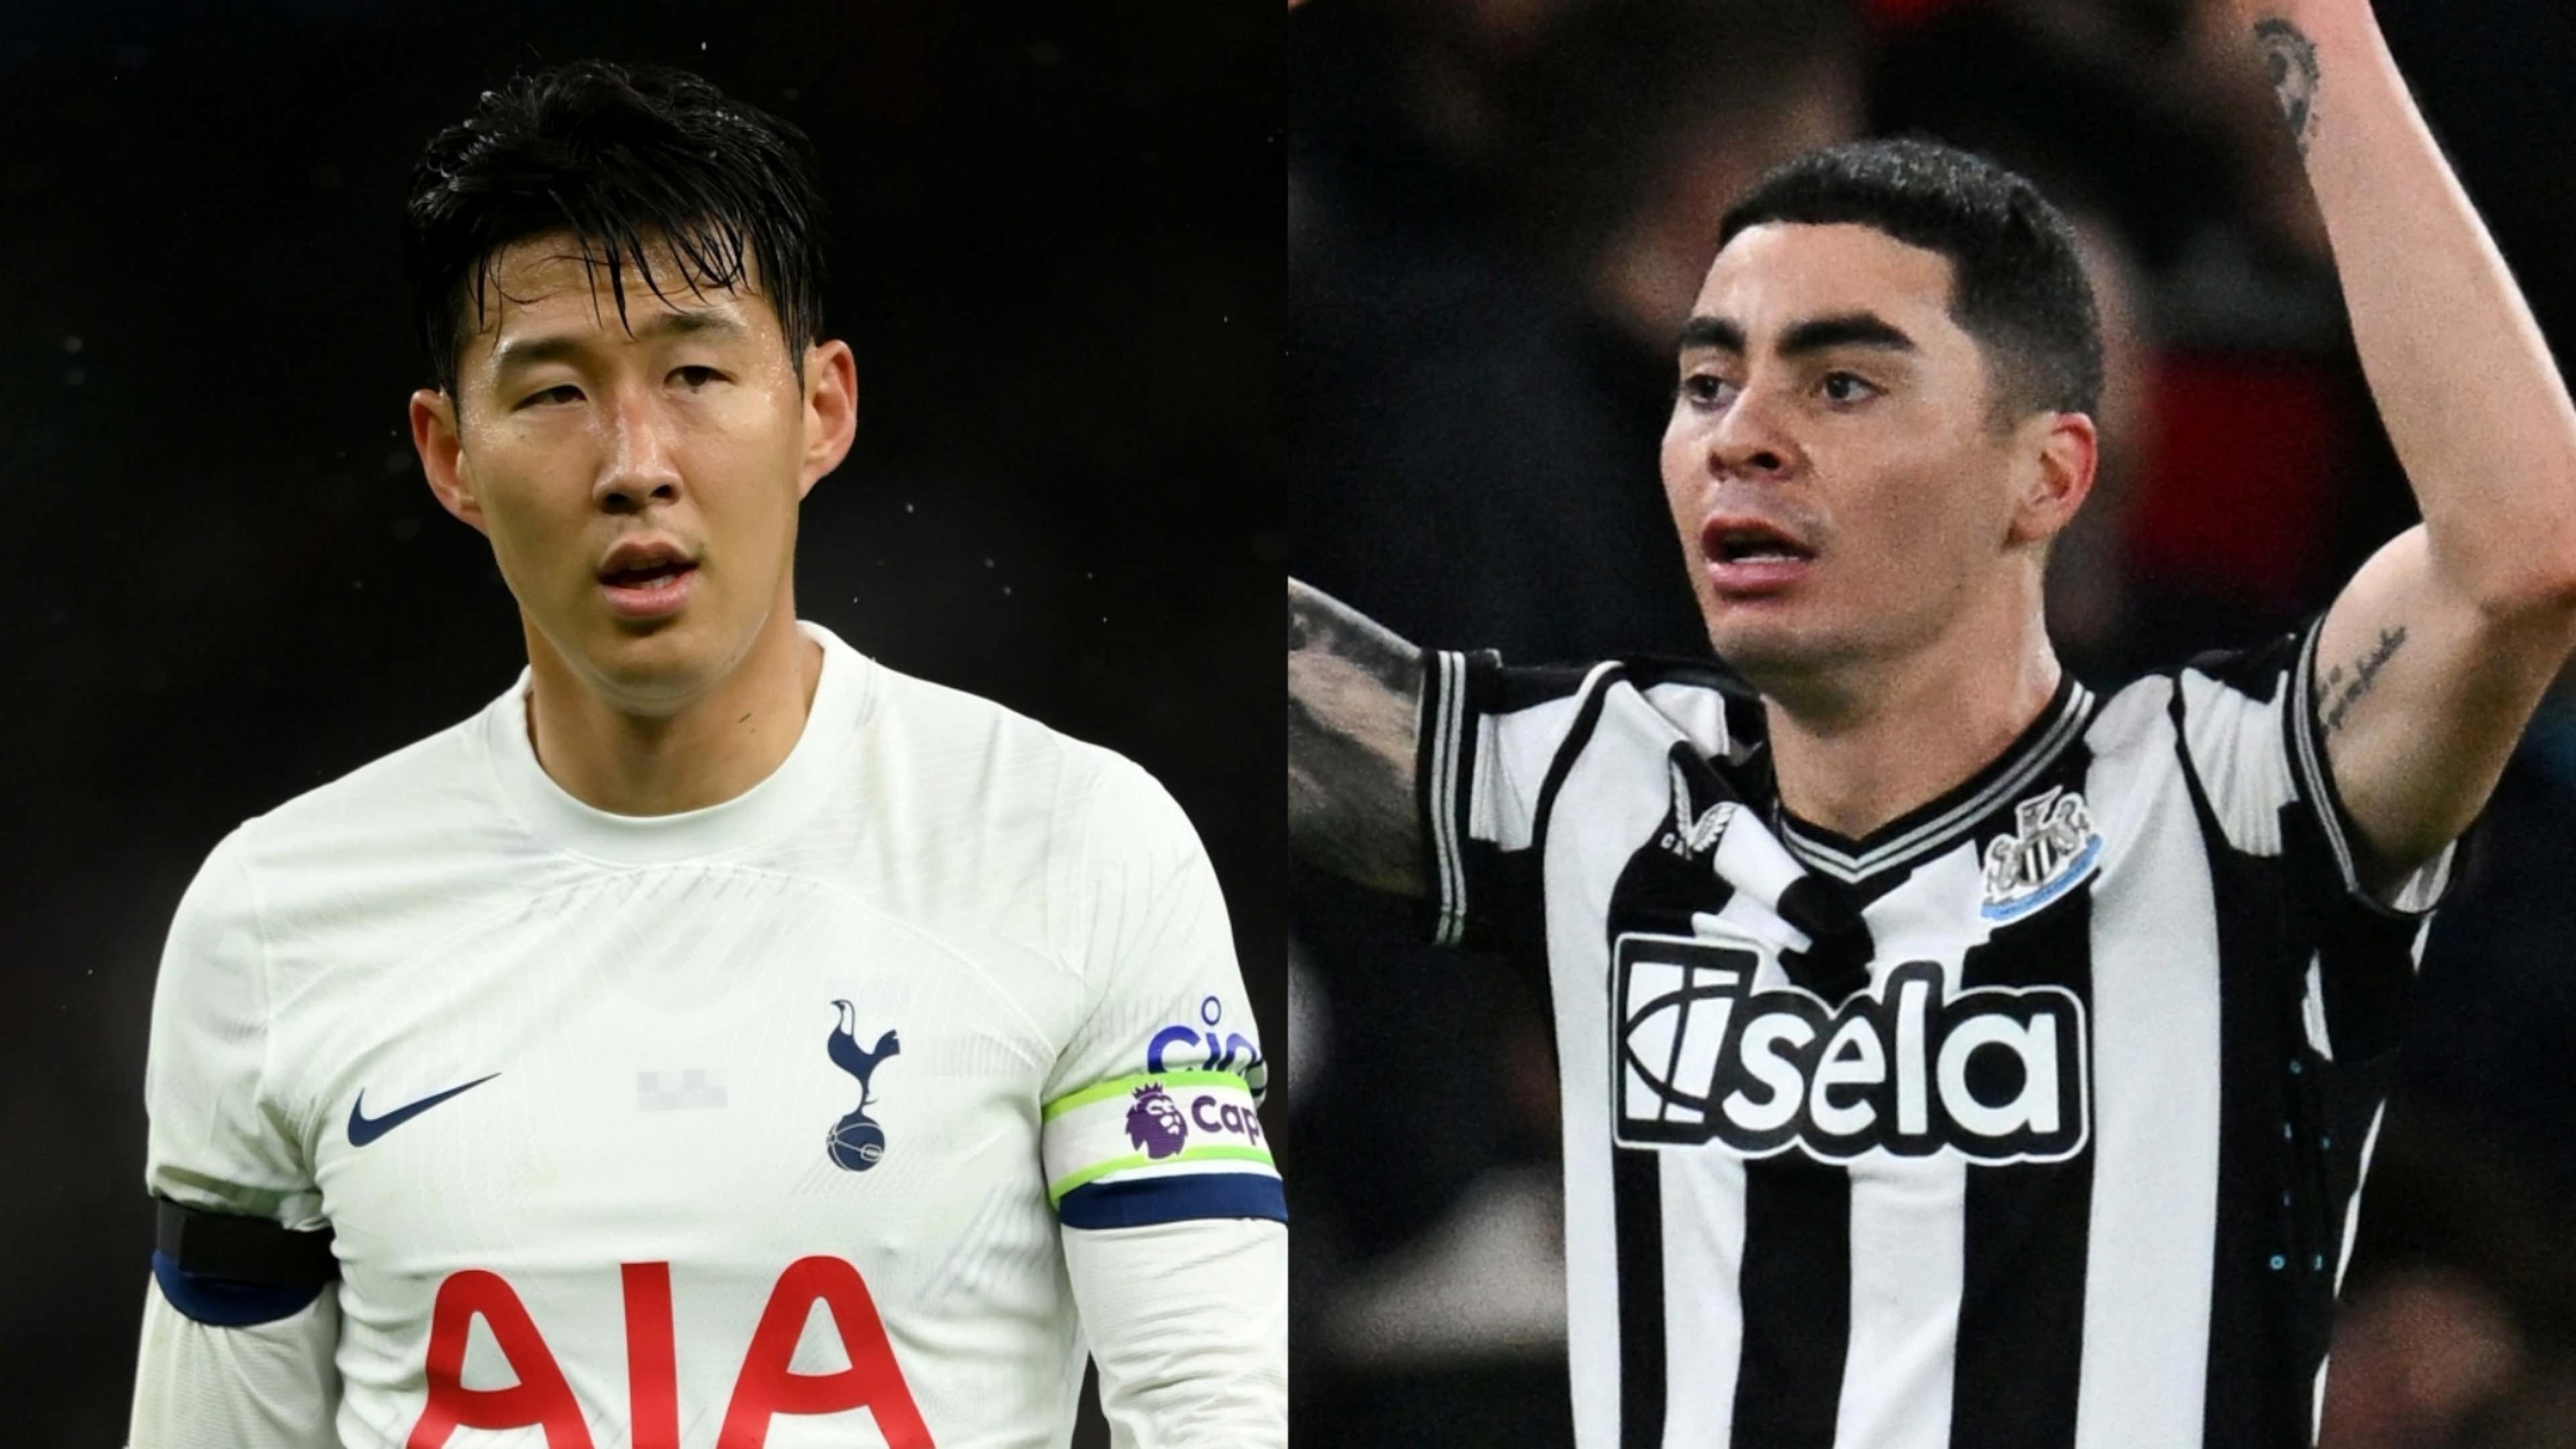 Tottenham Hotspur vs. Newcastle United: game time, live blog, and how to  watch online - Cartilage Free Captain